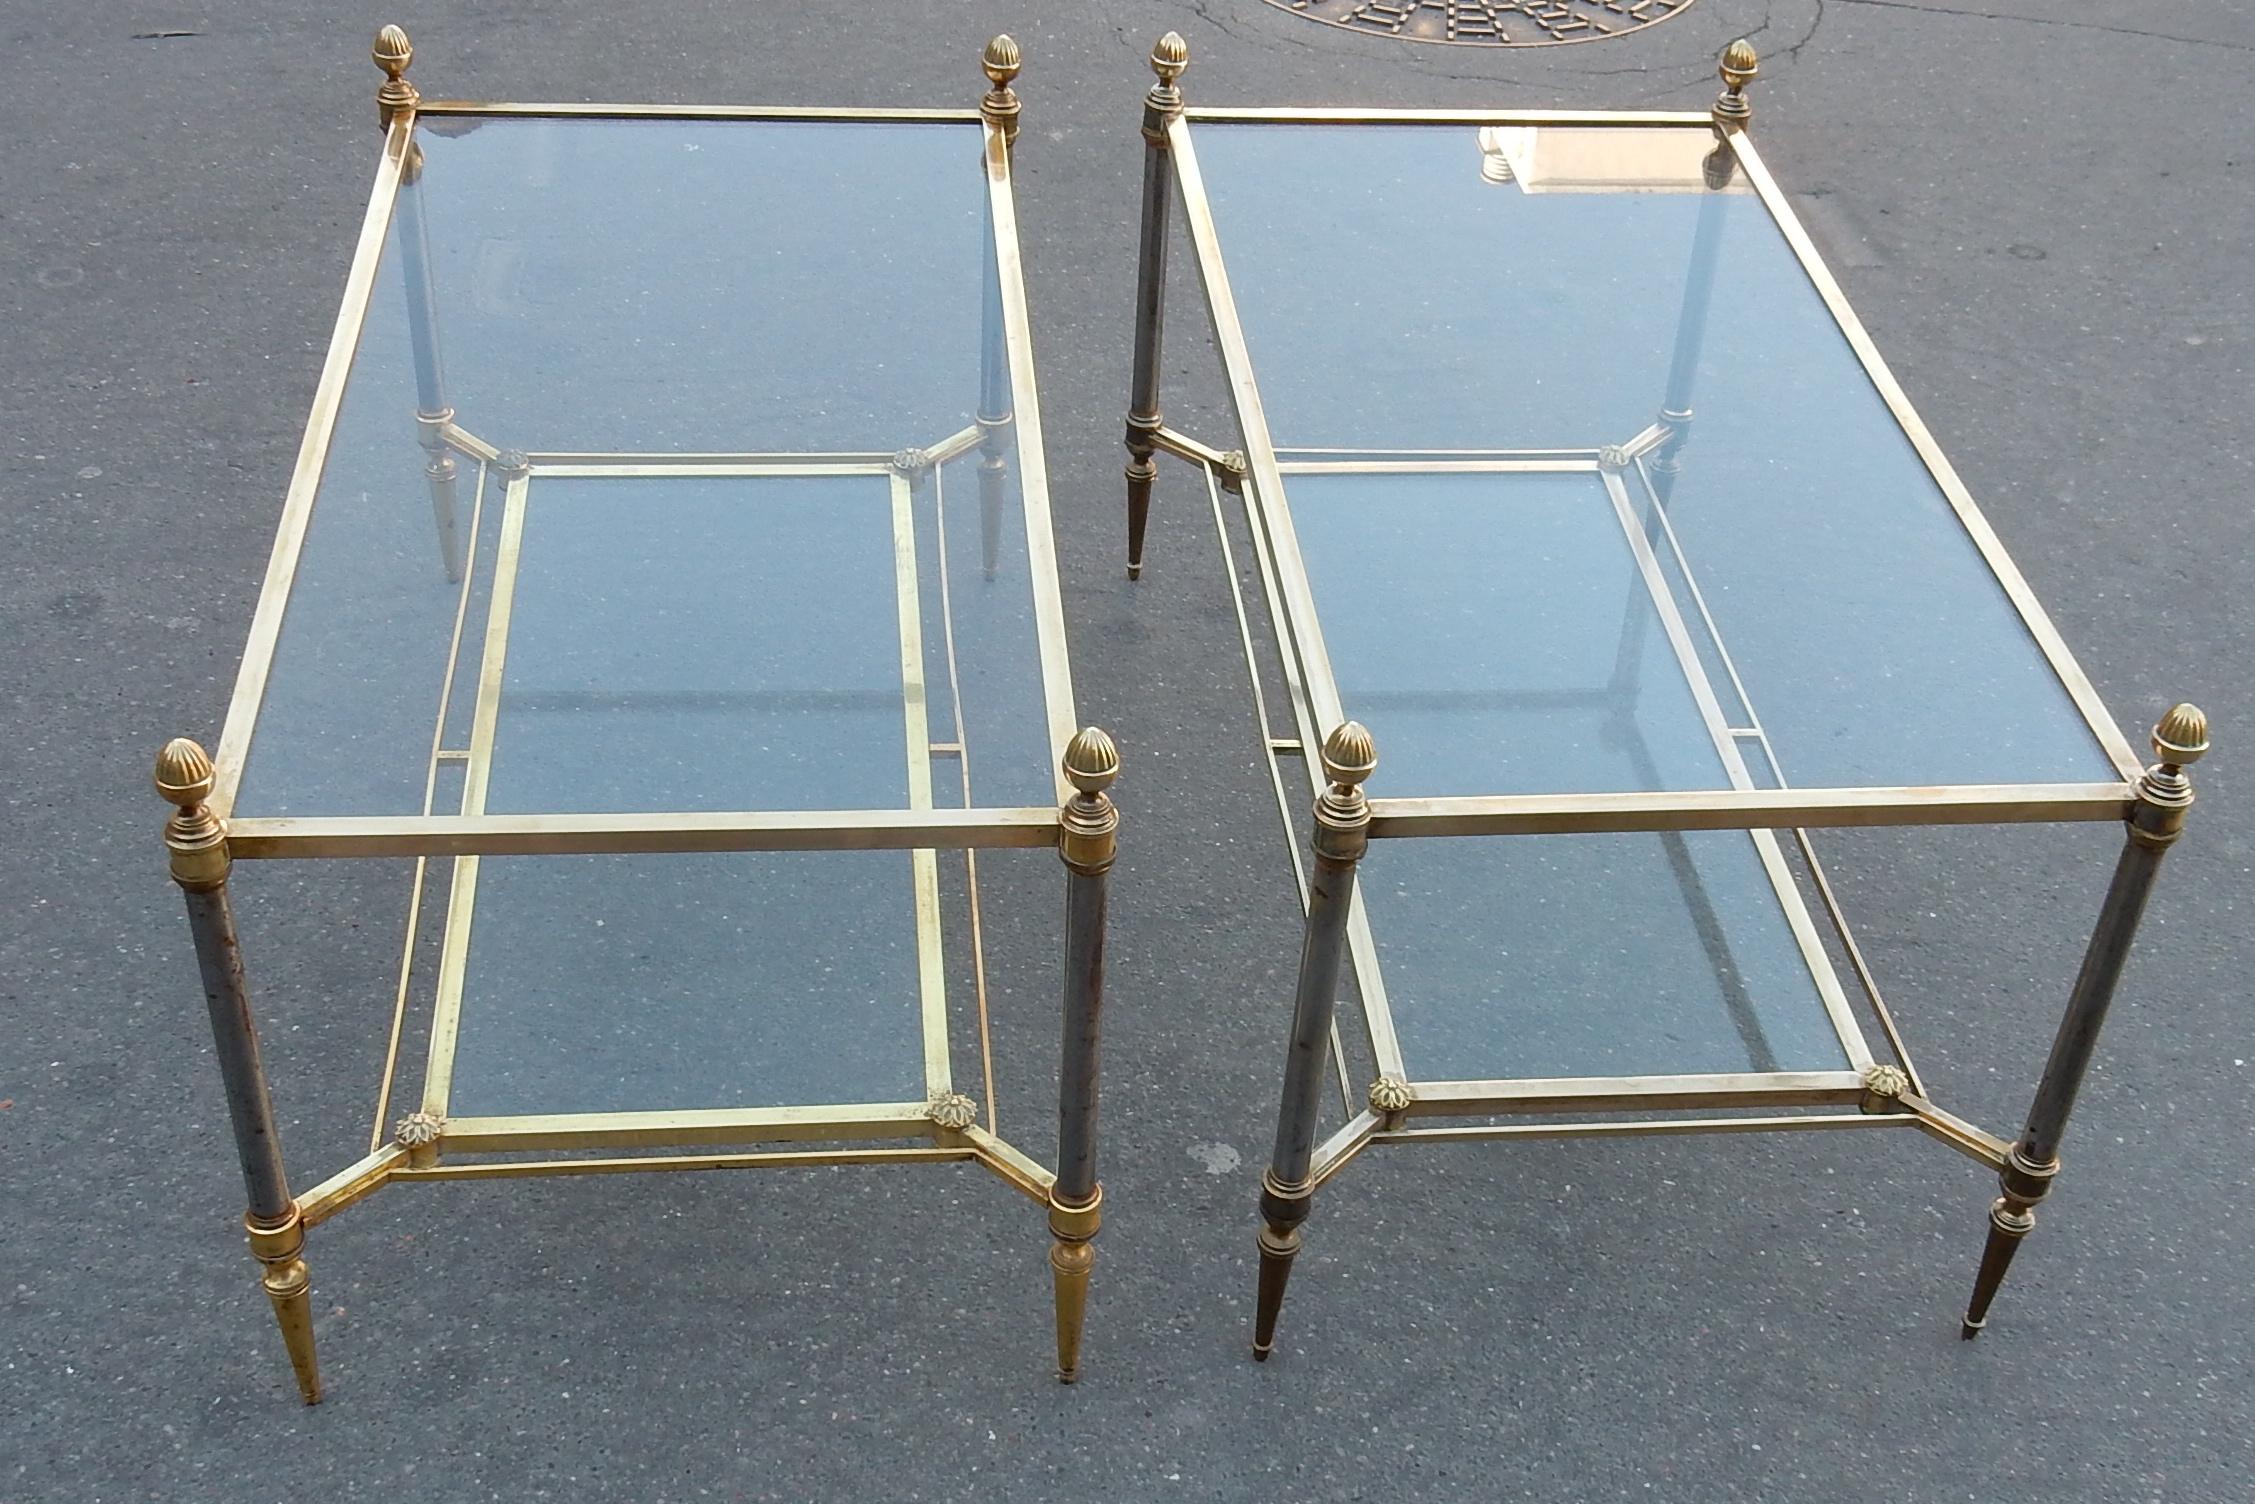 Neoclassical 1950-1970 Pair of Coffee Table Maison Jansen with Glasses